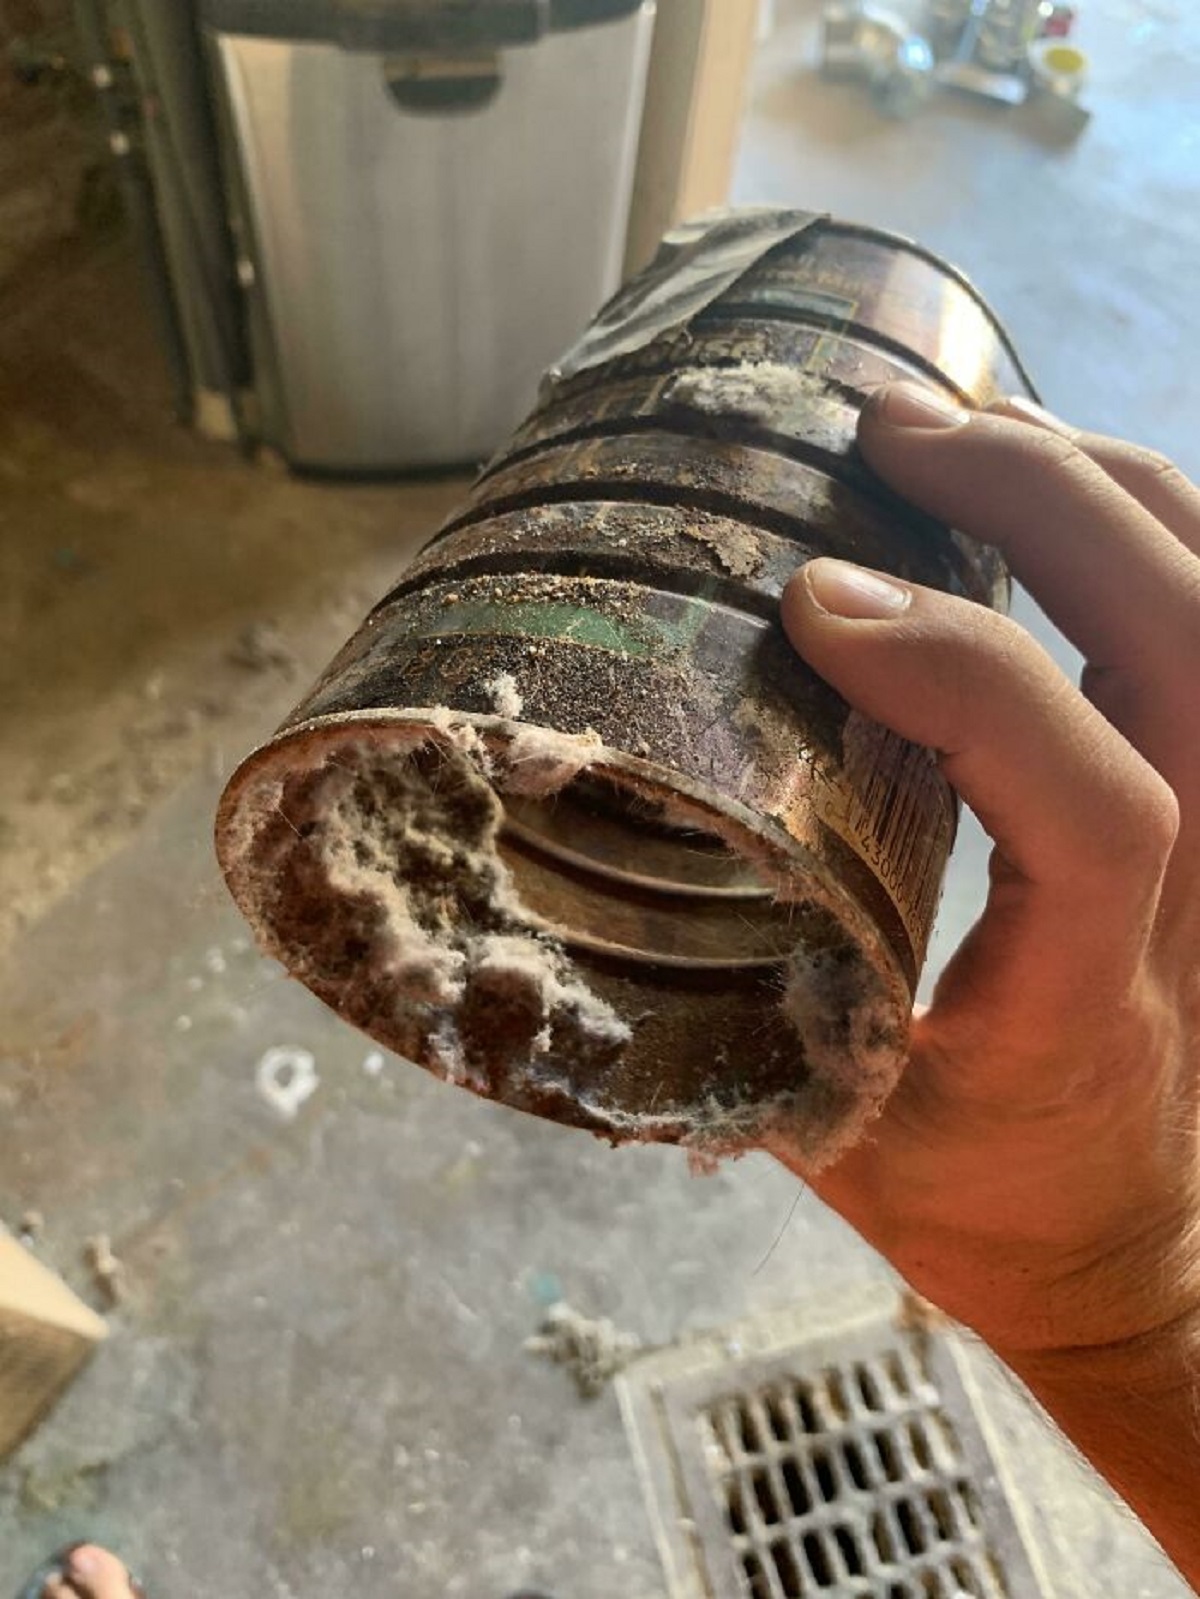 The Previous Owners Of My House Used A Coffee Can As A Piece Of Dryer Ductwork